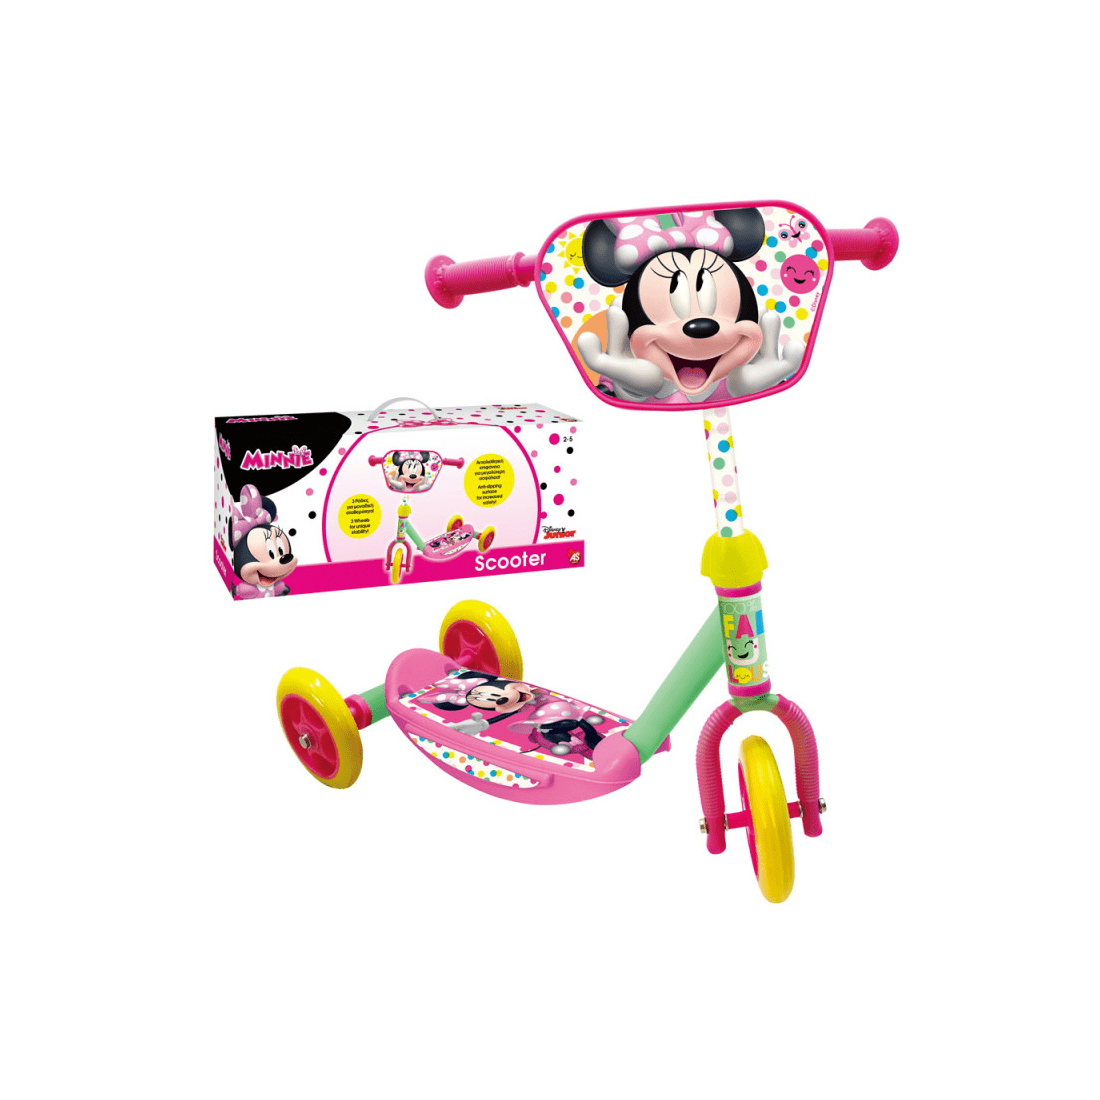 Scooter - Minnie Mouse